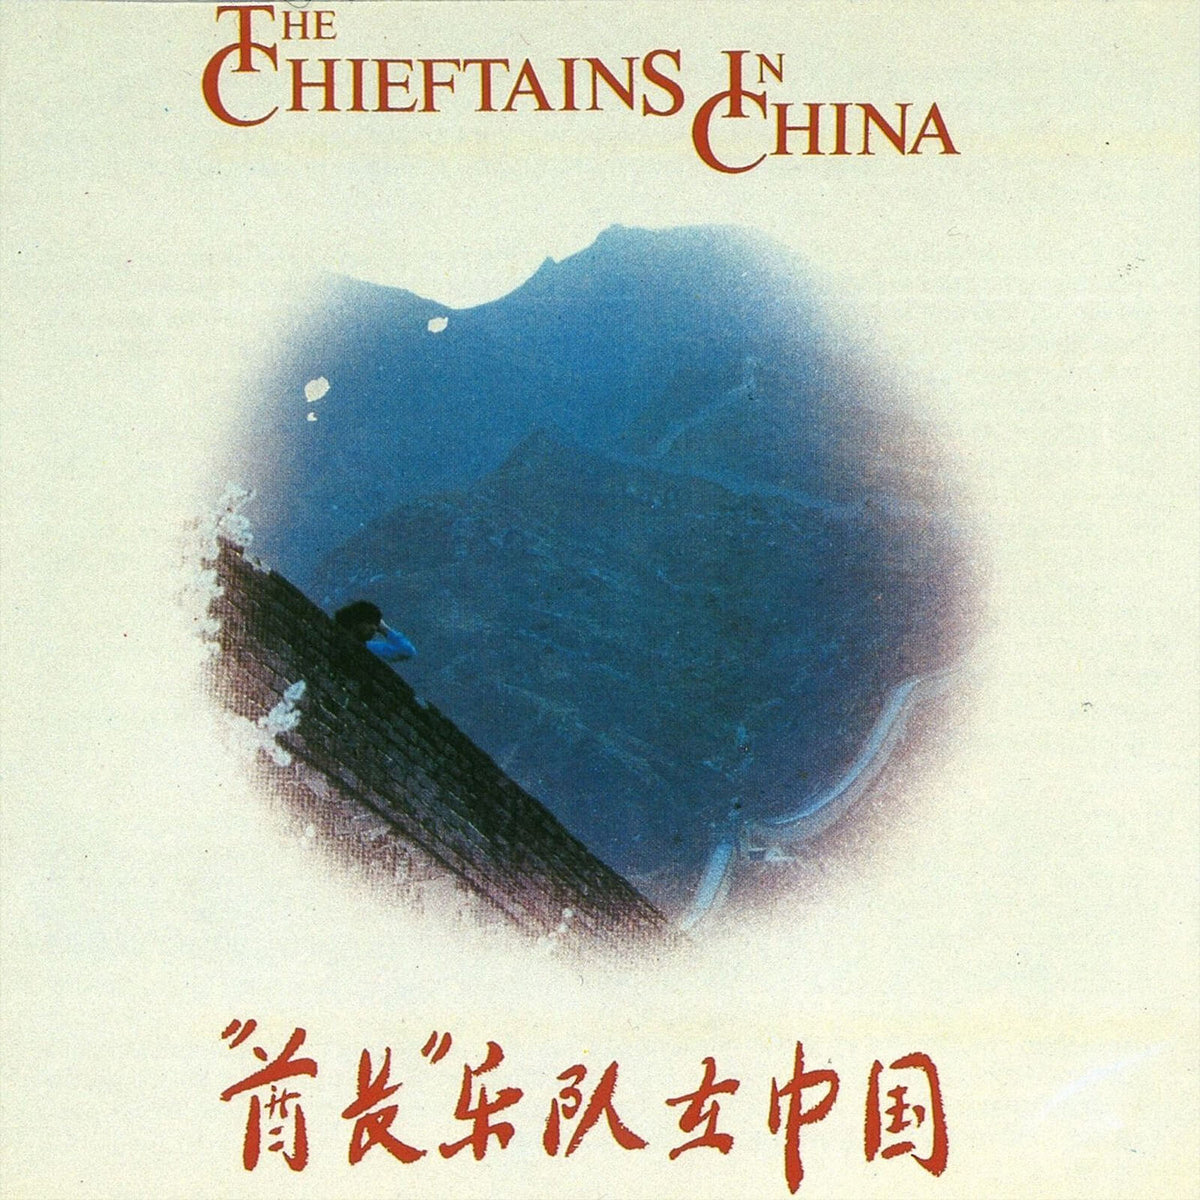 The Chieftains : The Chieftians in China